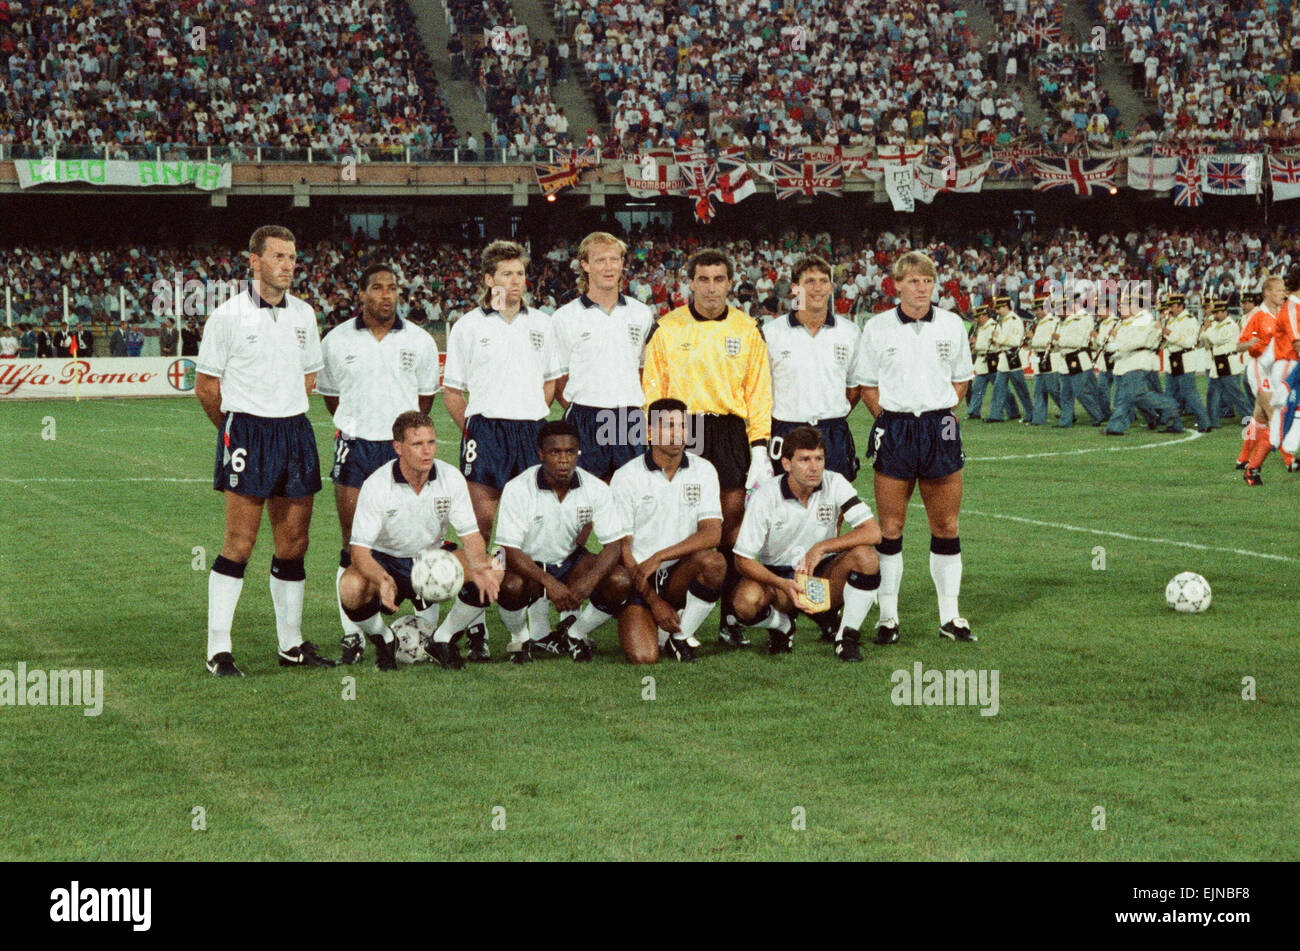 1990 World Cup First Round Group F match in Cagliari, Italy. England 0 v Holland 0. The England team line up before the match. They are back row left to right: Terry Butcher, John Barnes, Chris Waddle, Mark Wright, Peter Shilton, Gary Lineker and Stuart Pearce. Front row: Paul Gascoigne, Paul Parker, Des Walker and Bryan Robson. 16th June 1990. Stock Photo